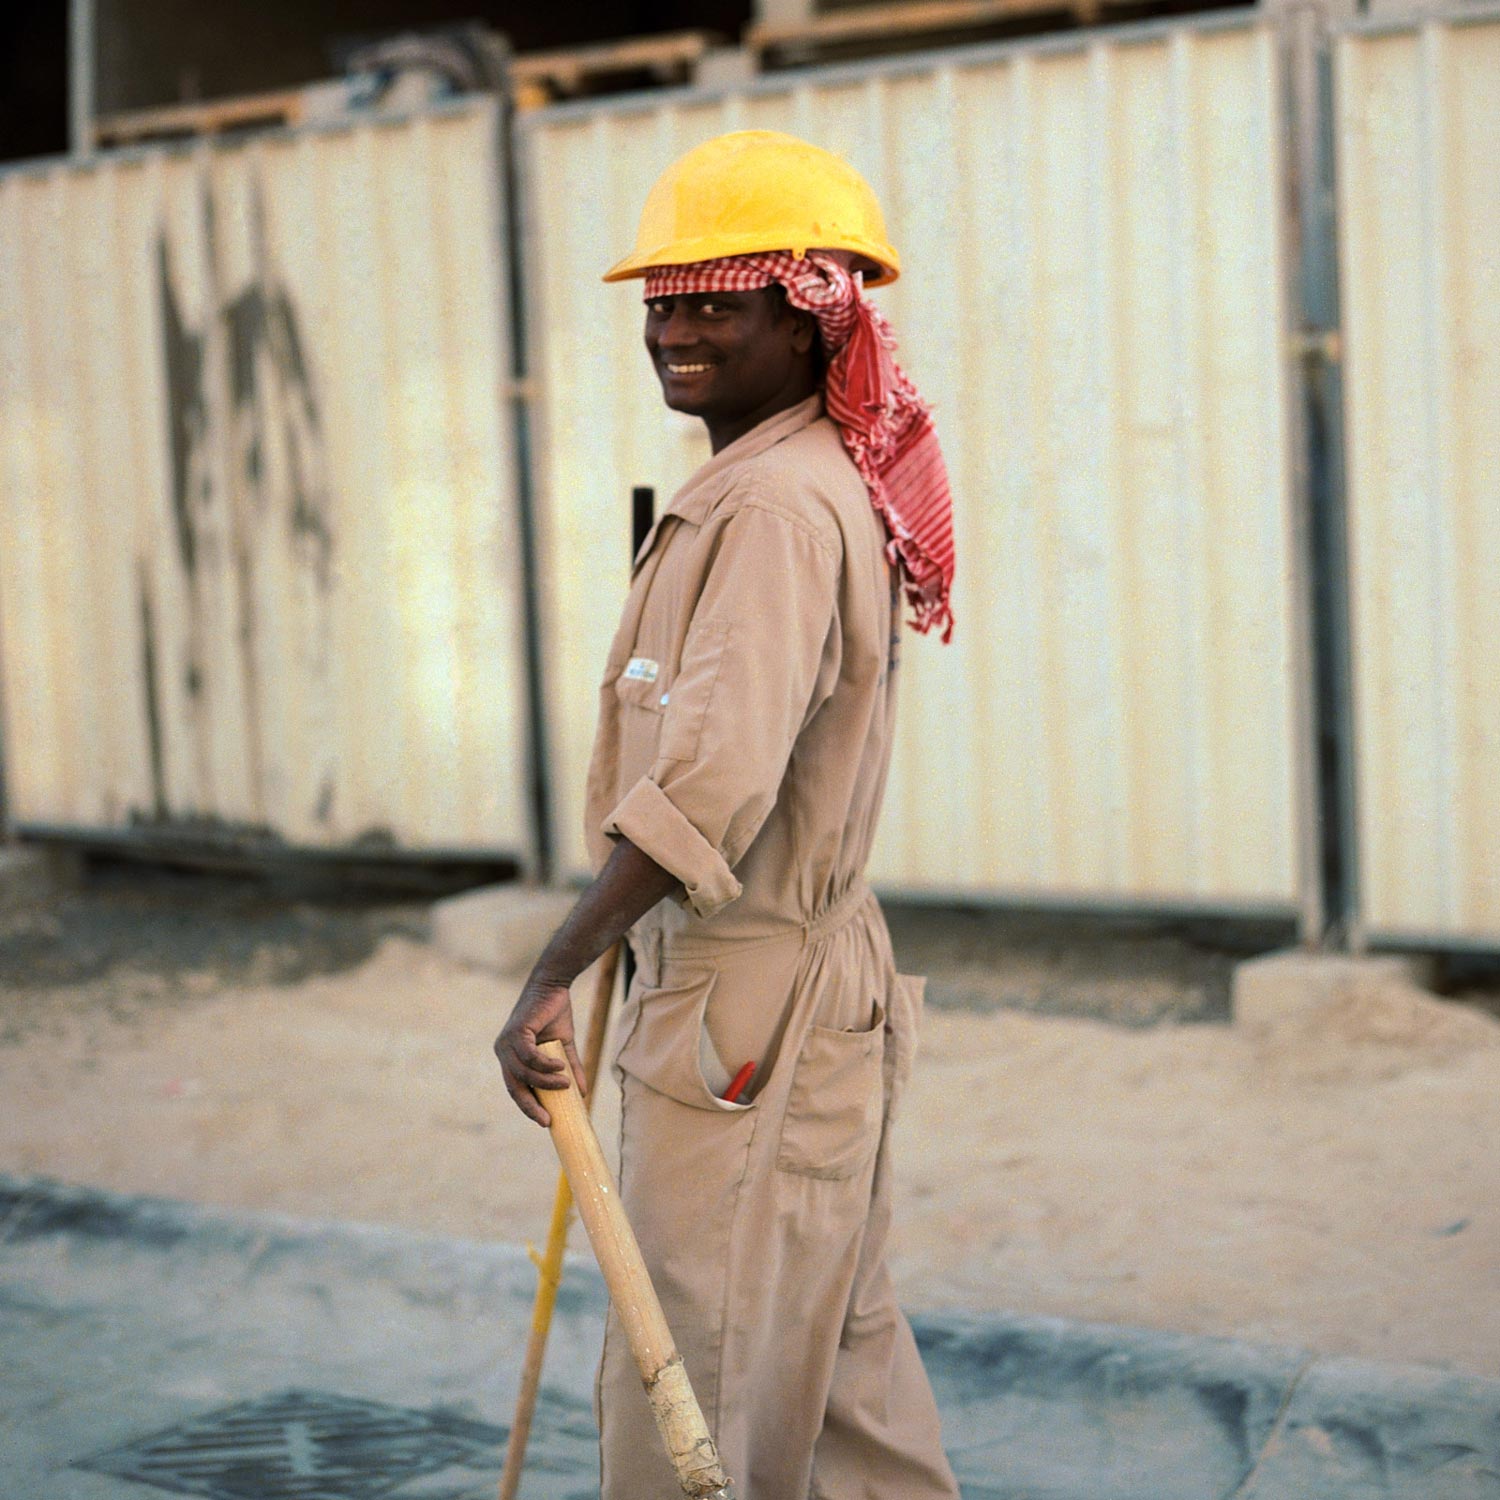 Indian labourer on site at the end of day.